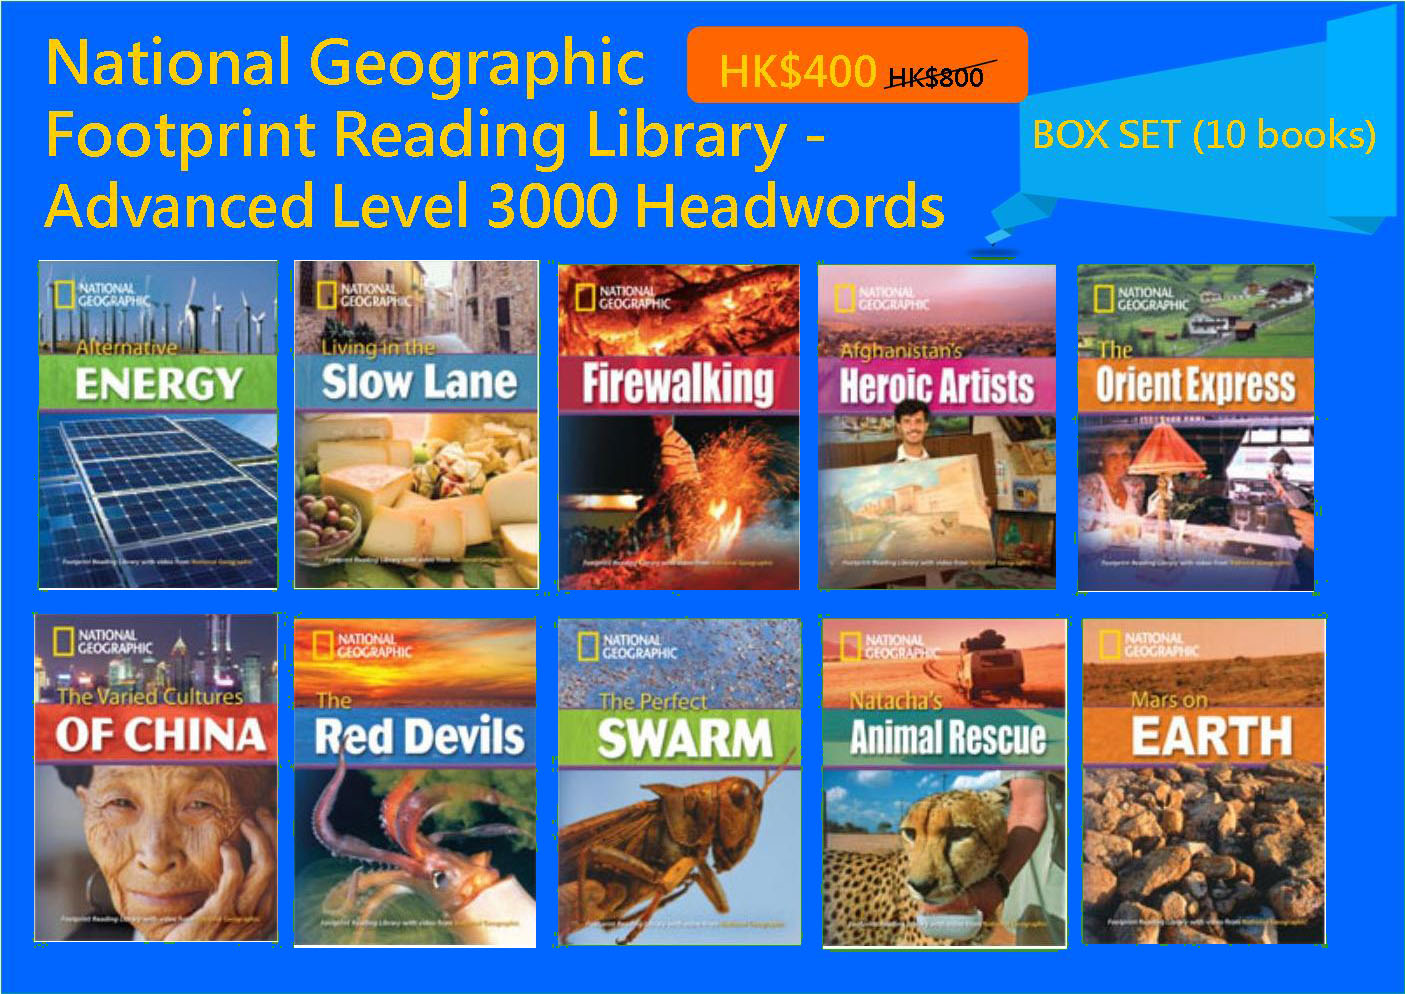 National Geographic Footprint Reading Library - Advanced Level 3000 Headwords (Box Set - 10 books)